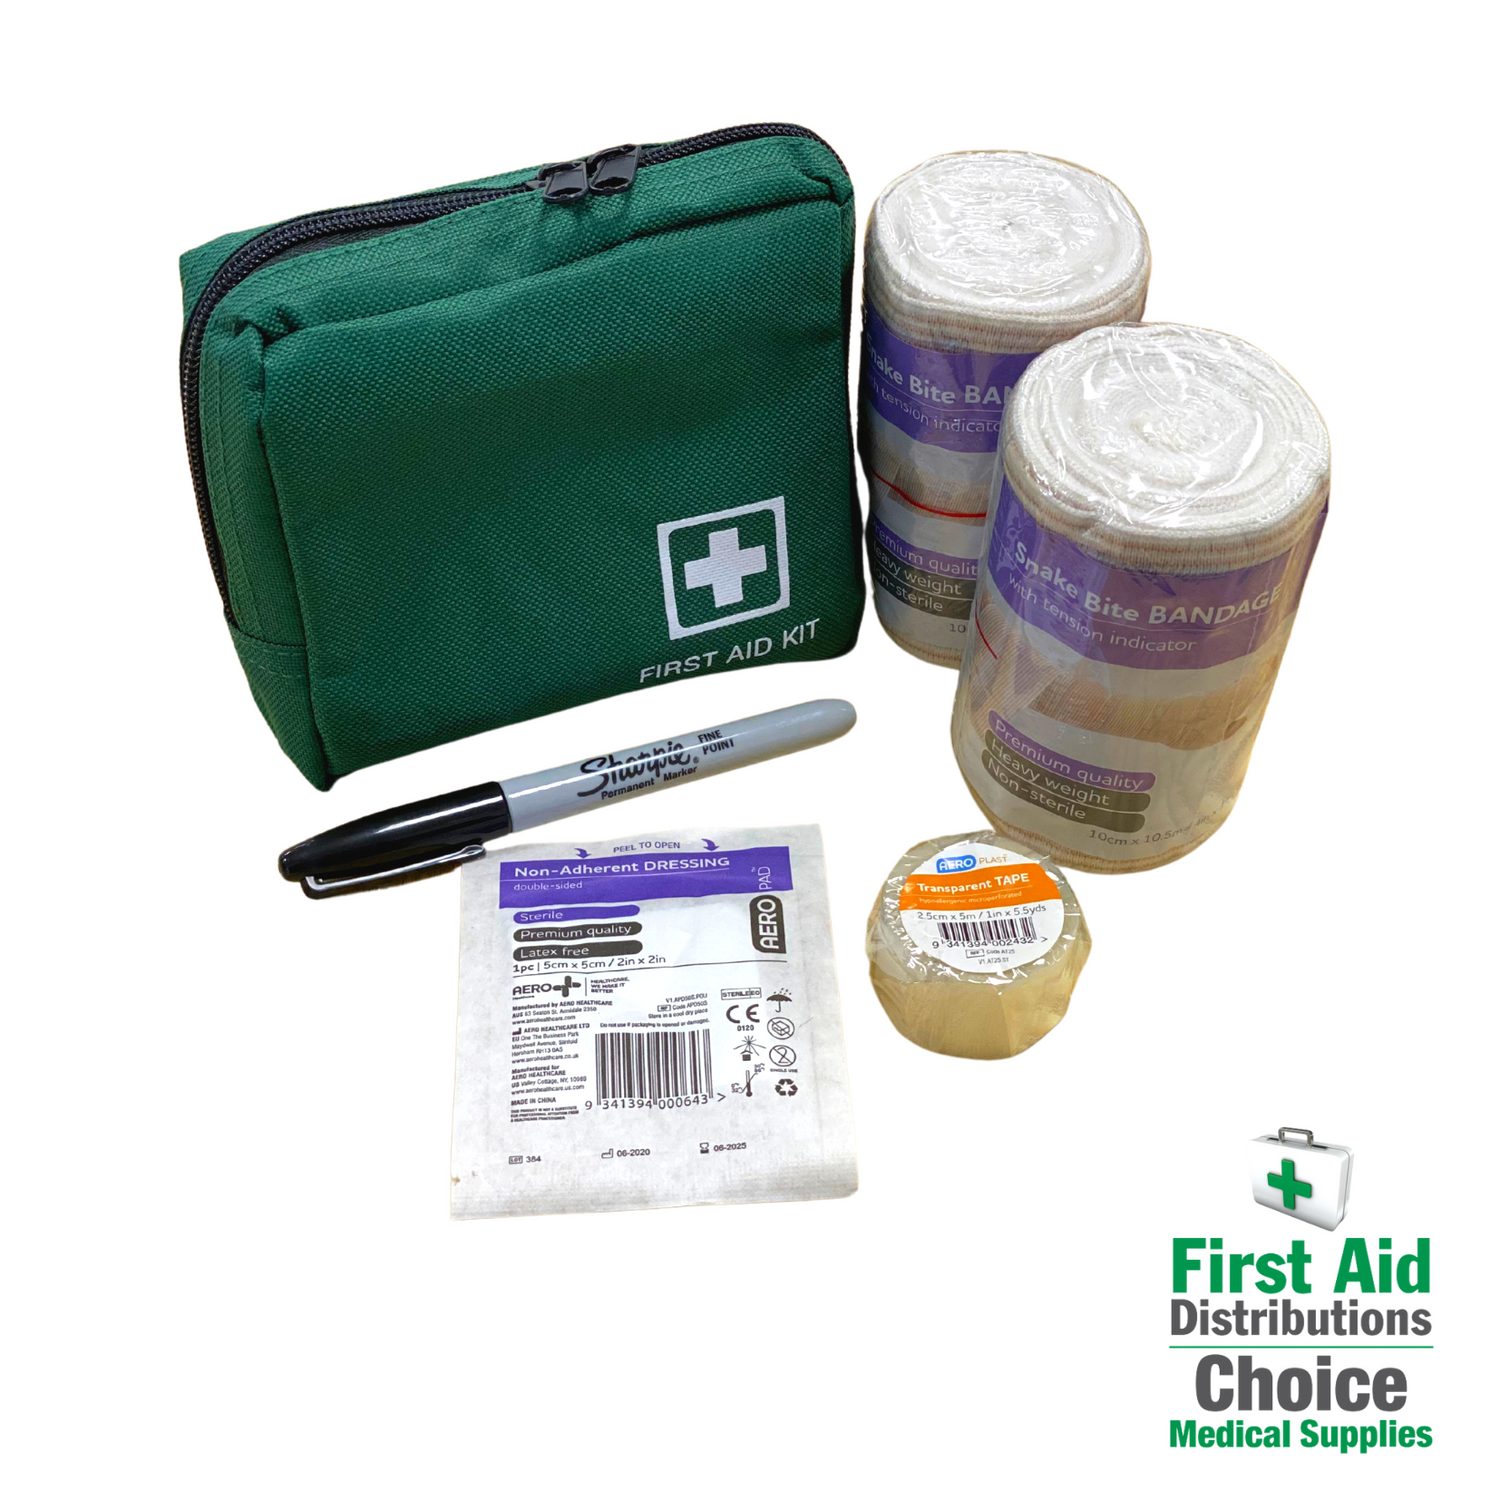 First aid kits - Personal